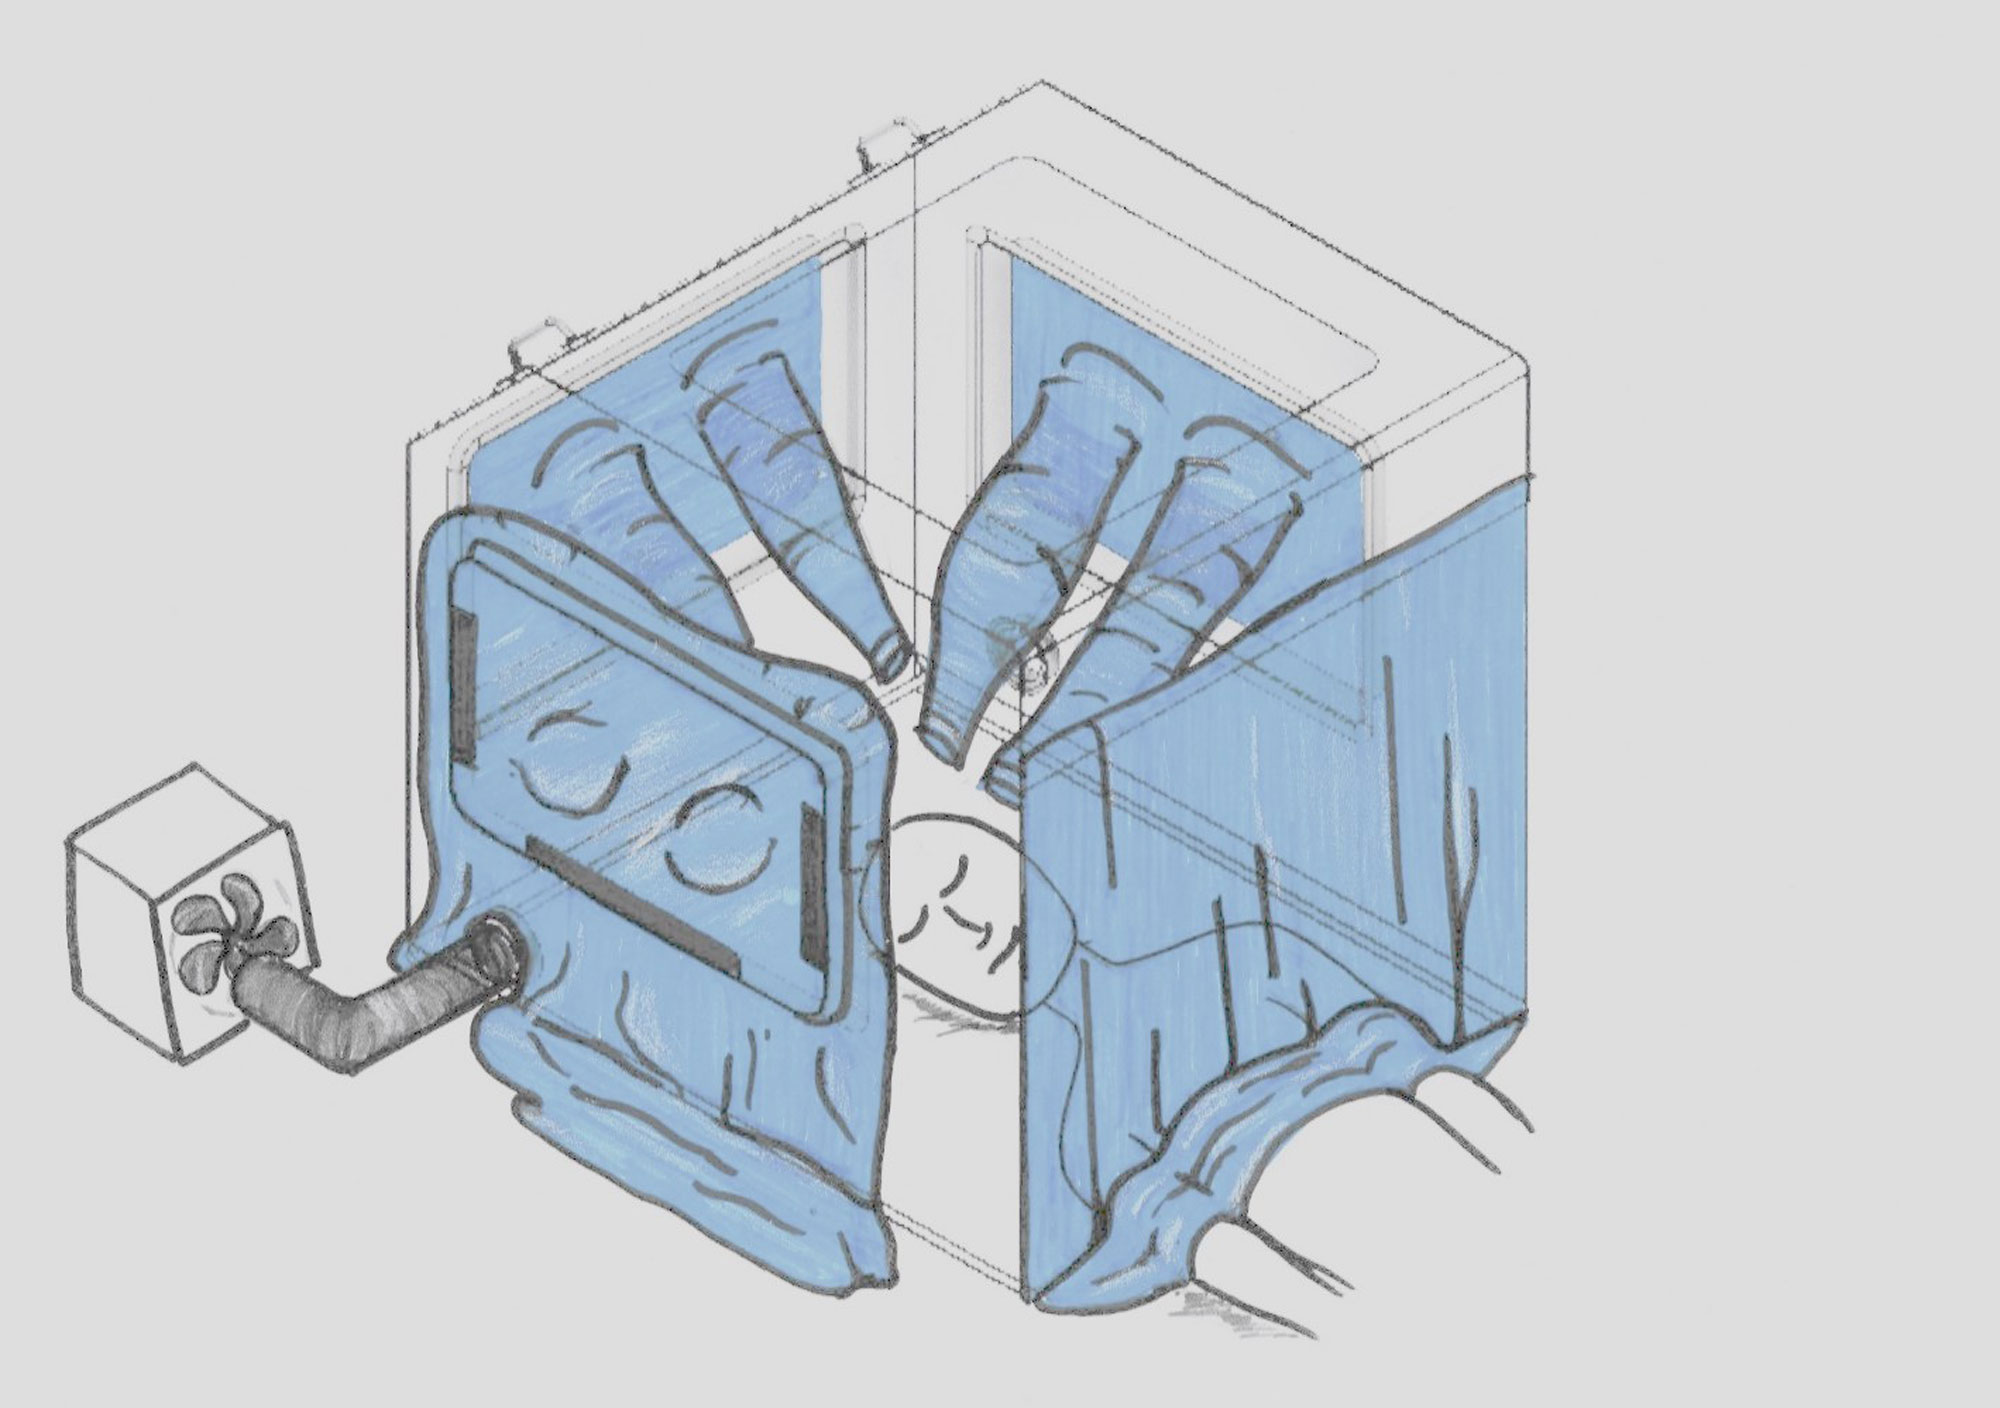 A sketch of a respiratory isolation box